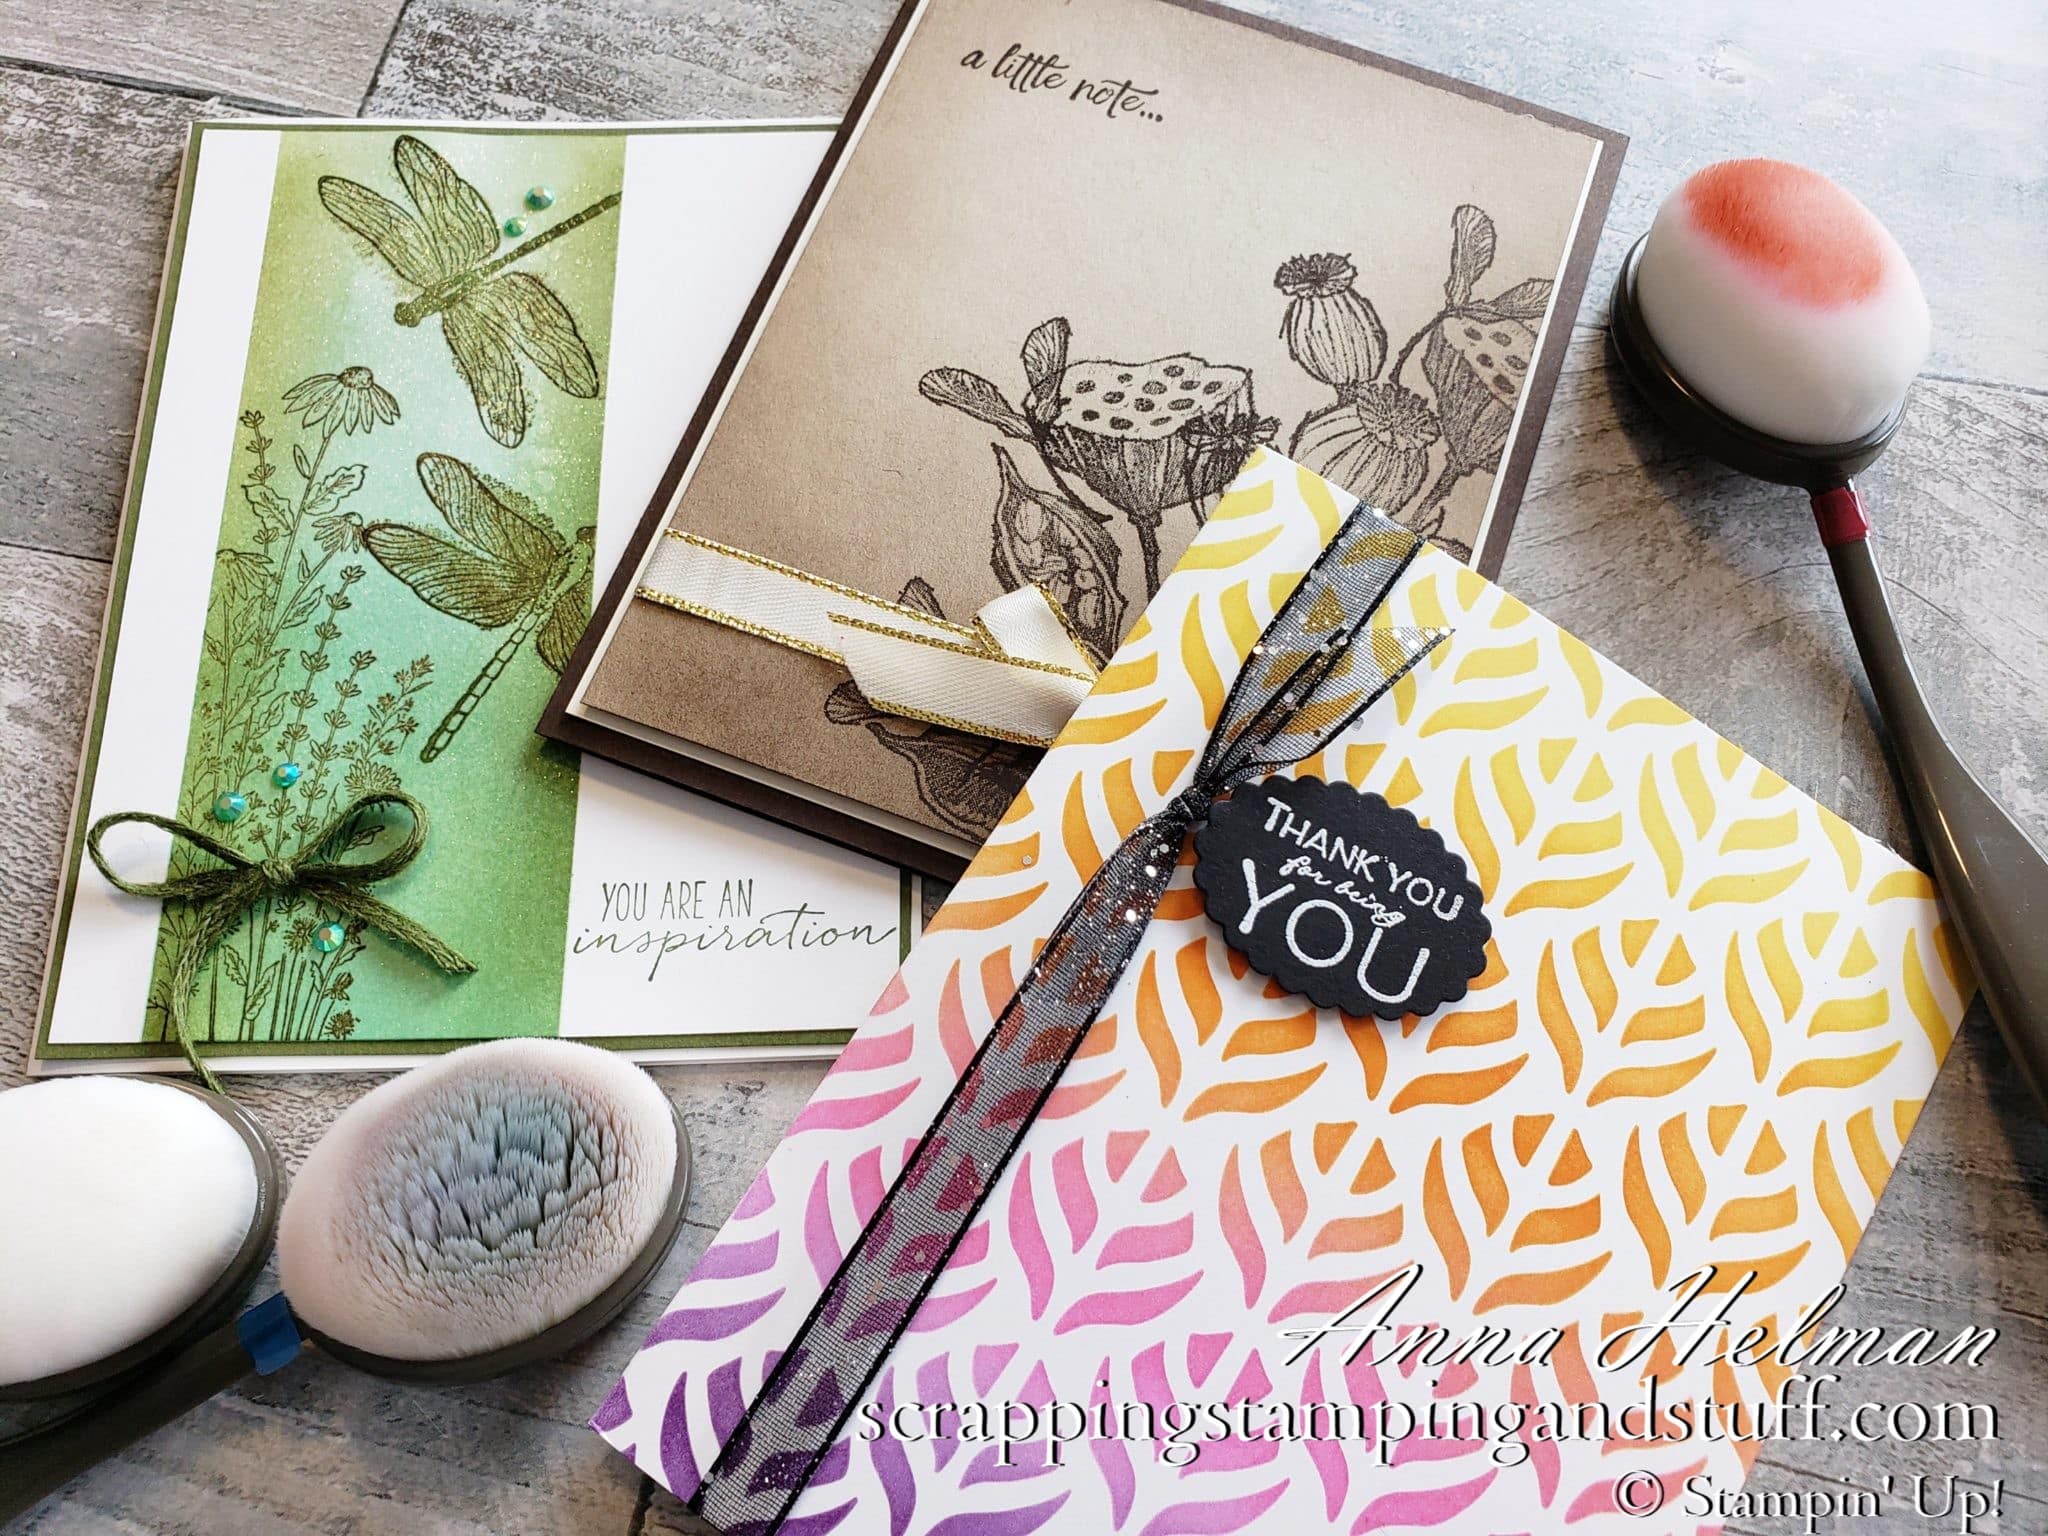 Stampin Up Blending Brushes & All You Need To Know To Use Them!